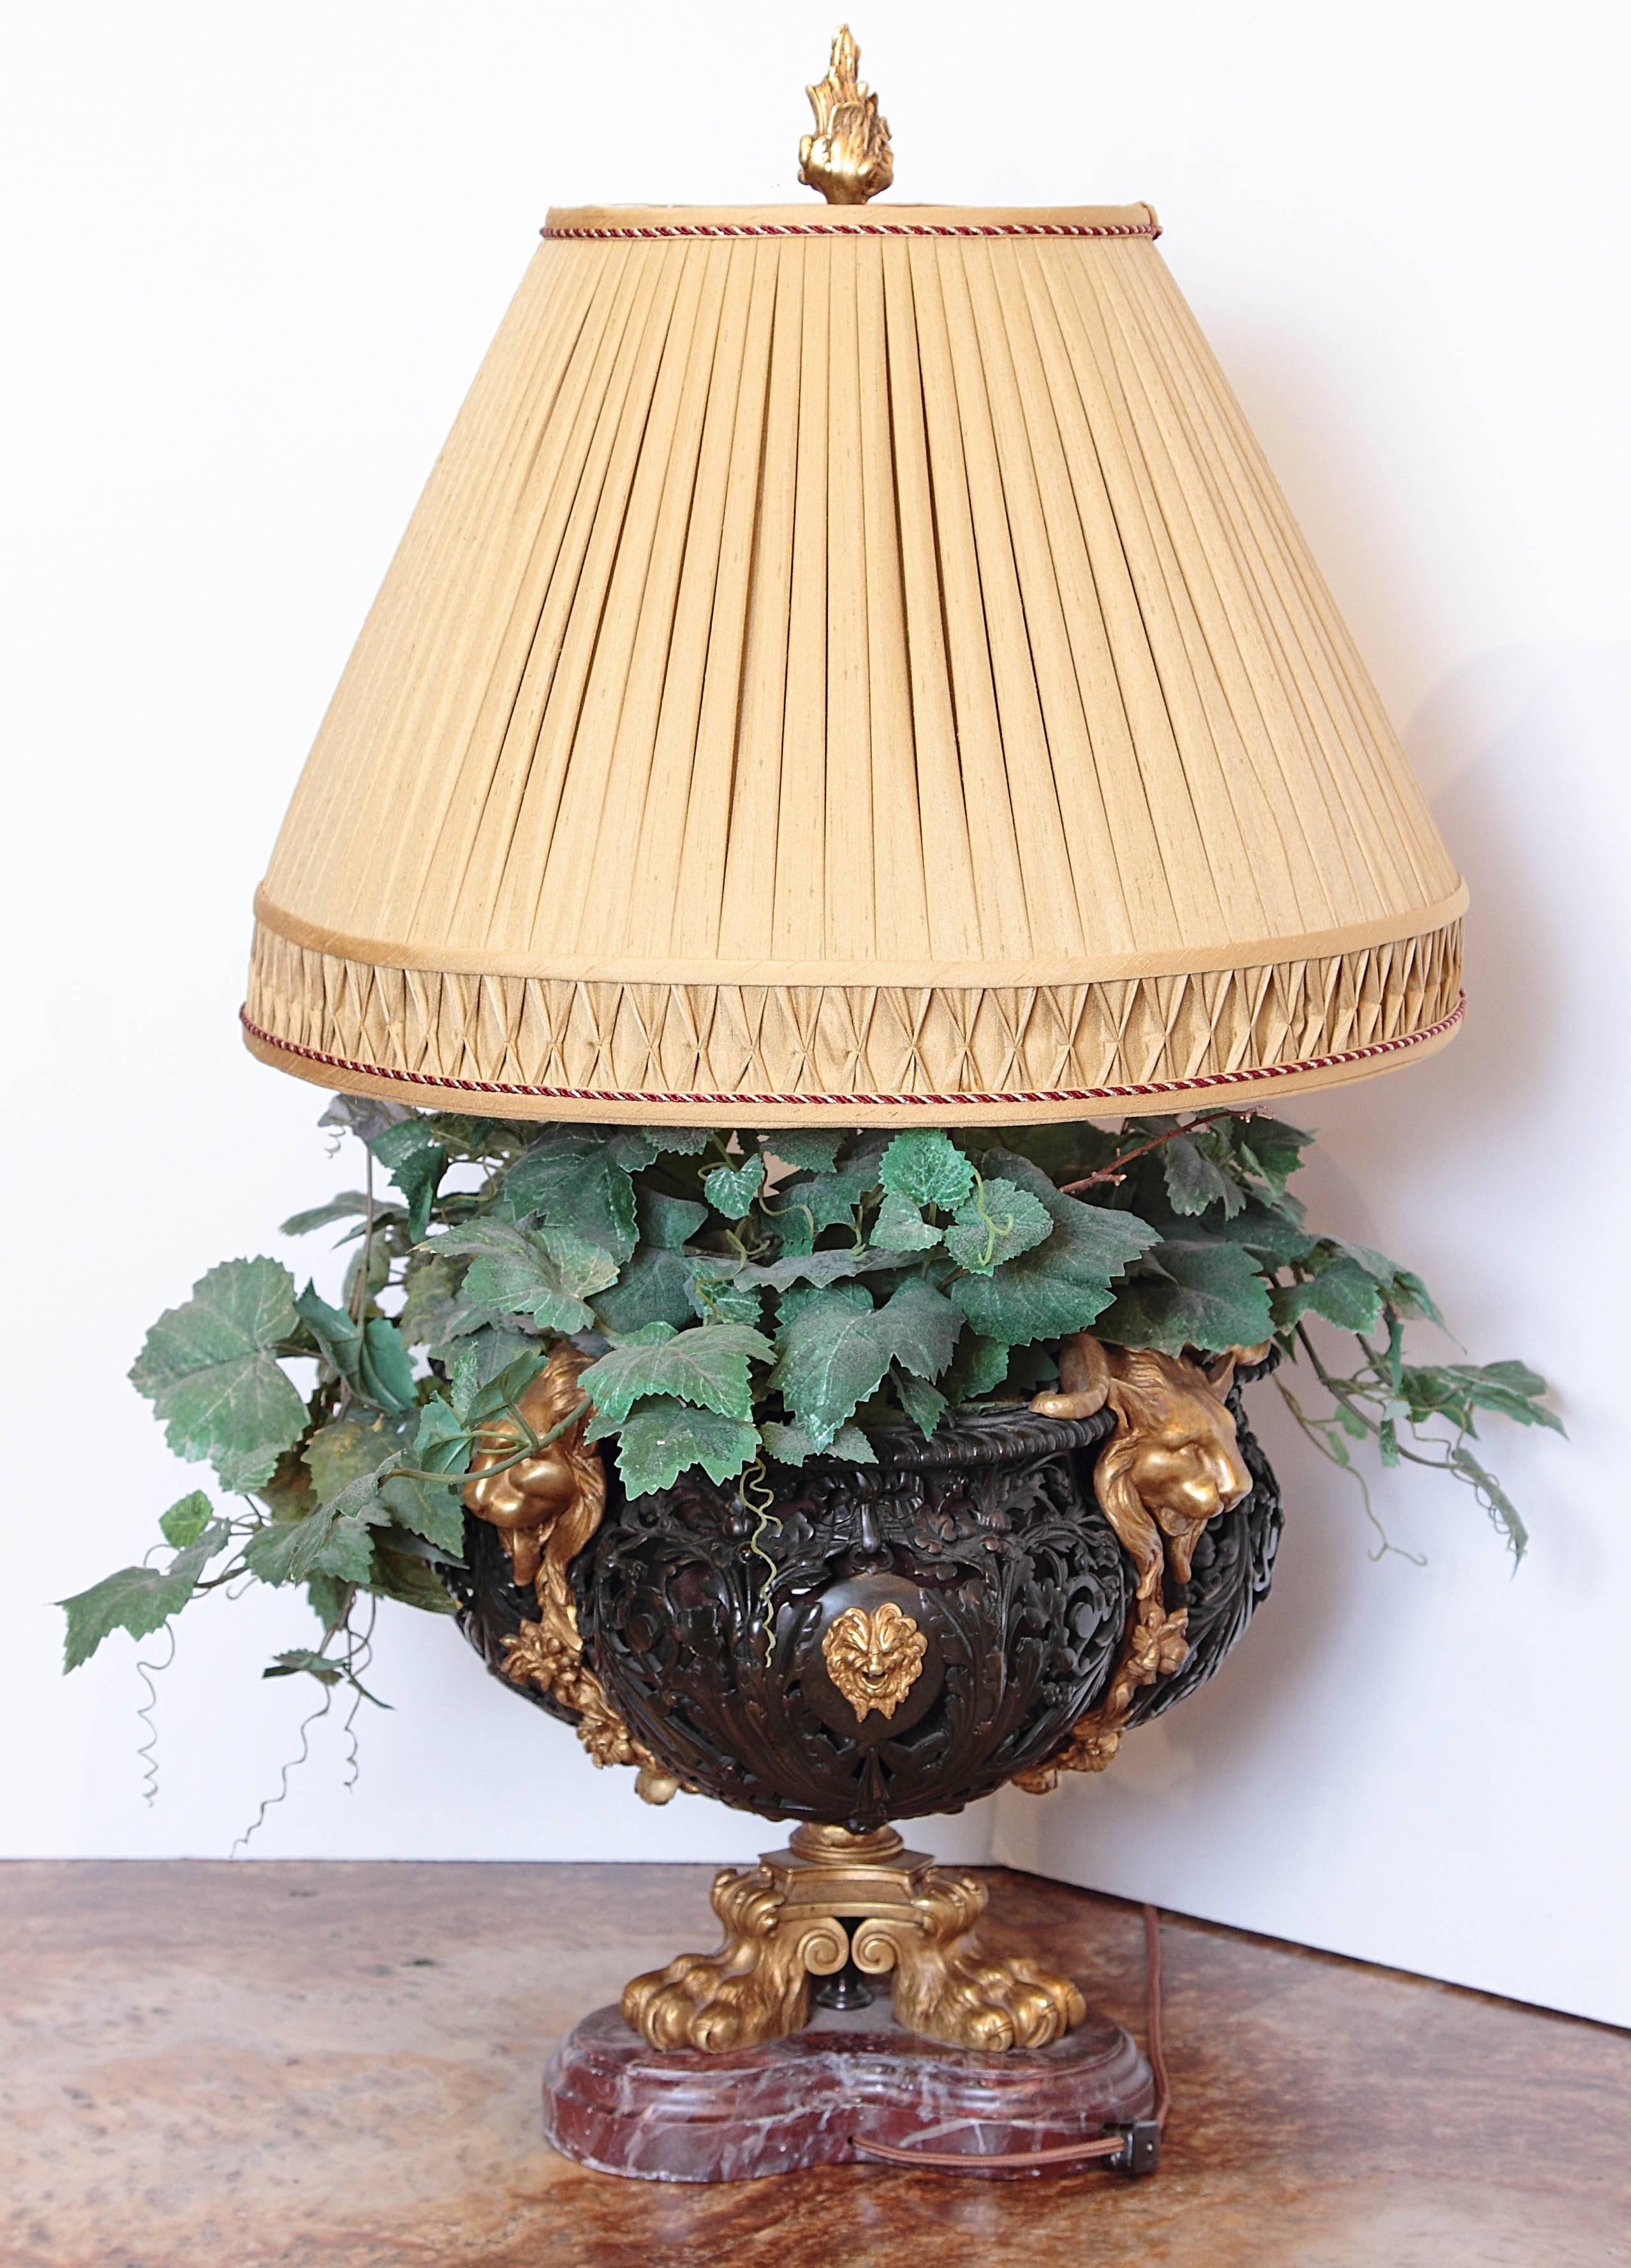 European 19th Century Patinated and Gilt Bronze Planter, Made into Lamp